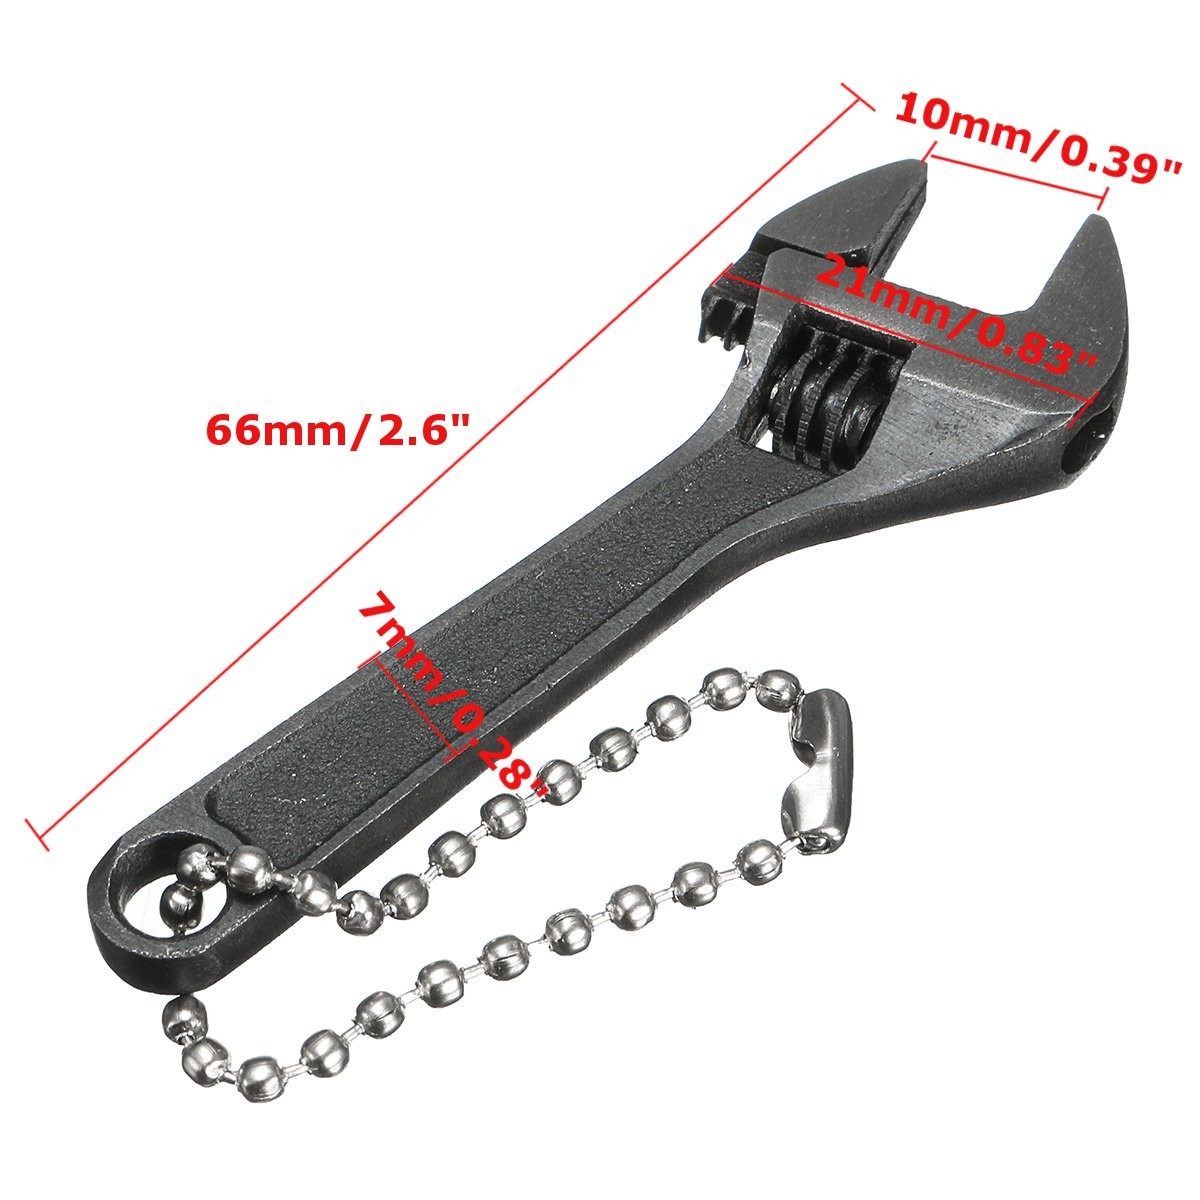 DANIU-66mm-26inch-Mini-Metal-Adjustable-Wrench-Spanner-Hand-Tool-0-10mm-Jaw-Wrench-Black-1199883